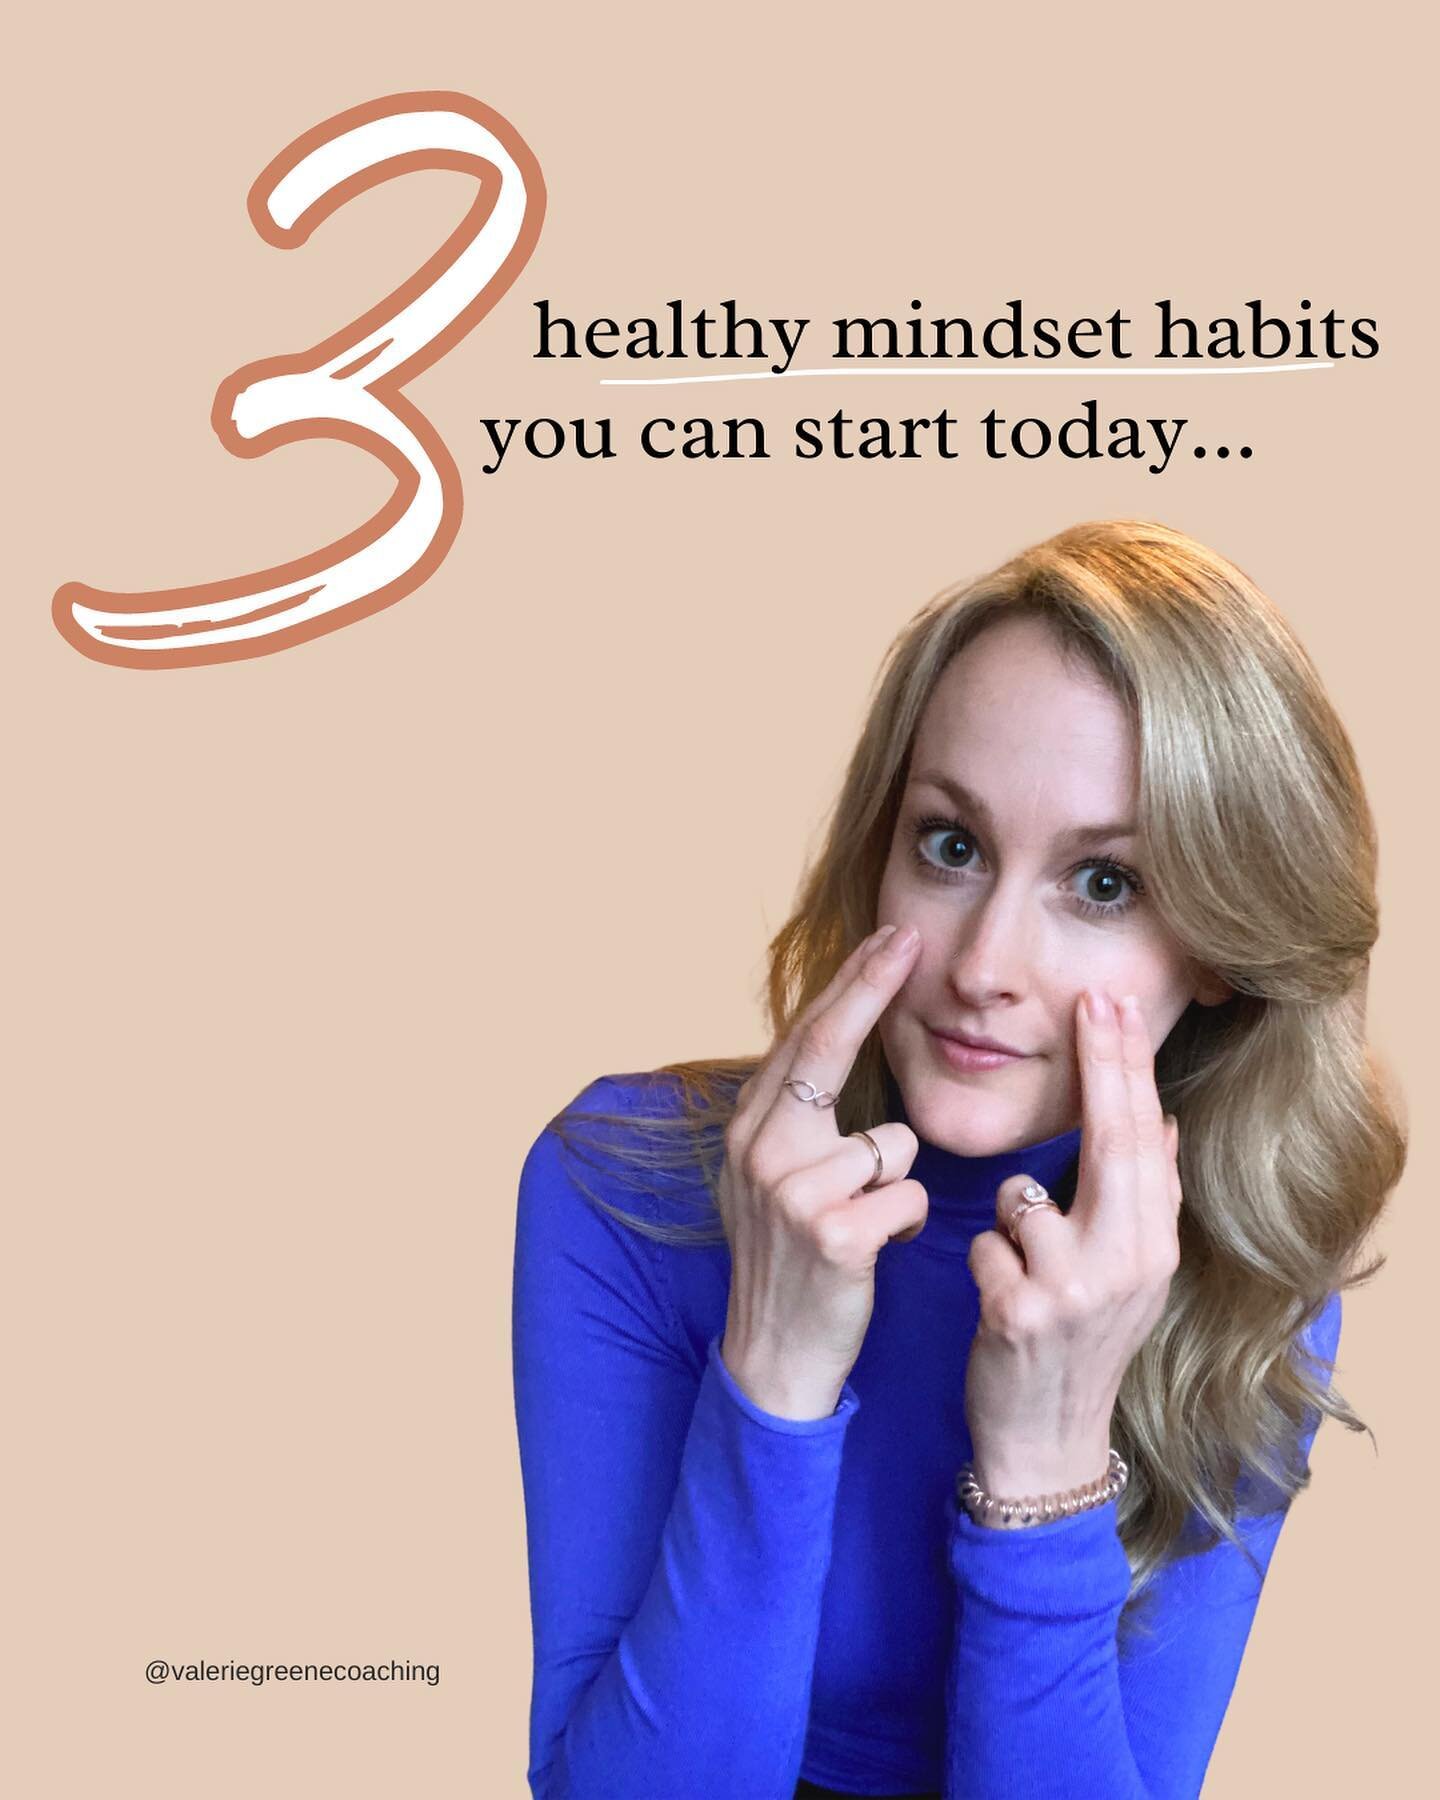 ✨ 3 Easy Mindset Habits You Can Start Today ✨

⭐️ Practicing Gratitude--

It's so easy to overlook the little things in life, but trust me, they make a big difference. Take a moment each day to appreciate the simple pleasures - your running water, a 